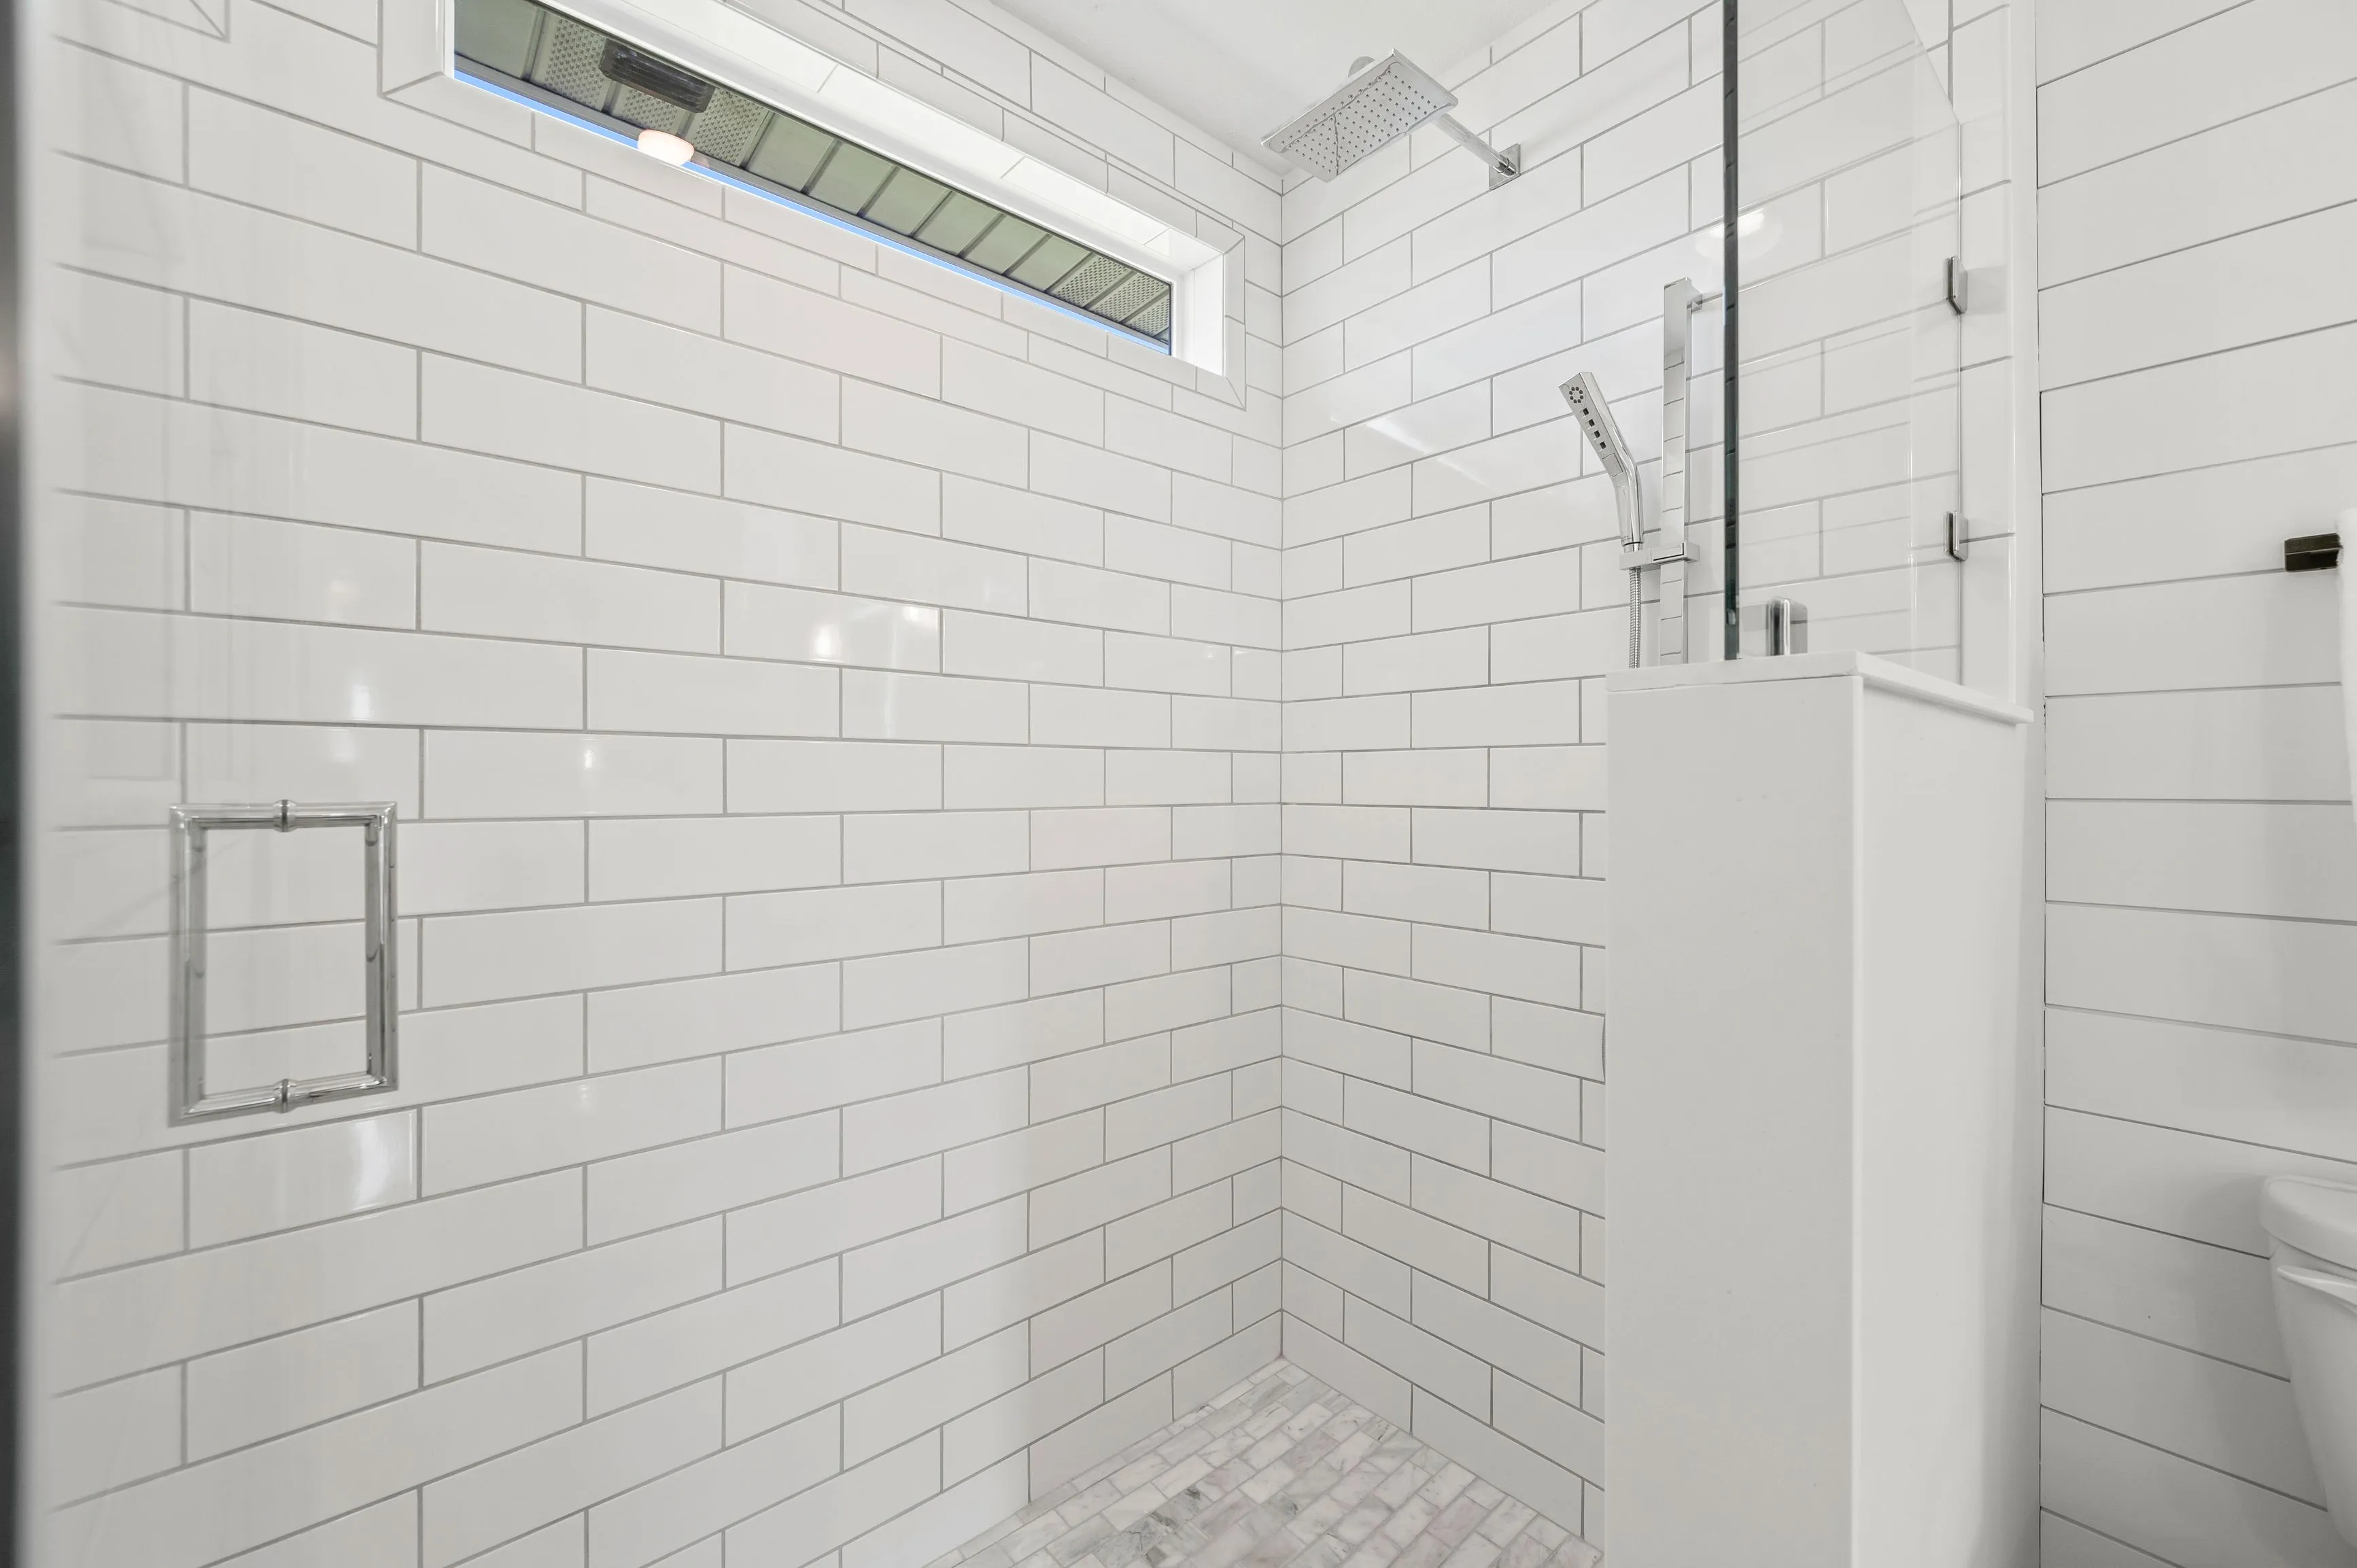 Modern bathroom with white subway tiles, glass shower door, and built-in niche for toiletries.